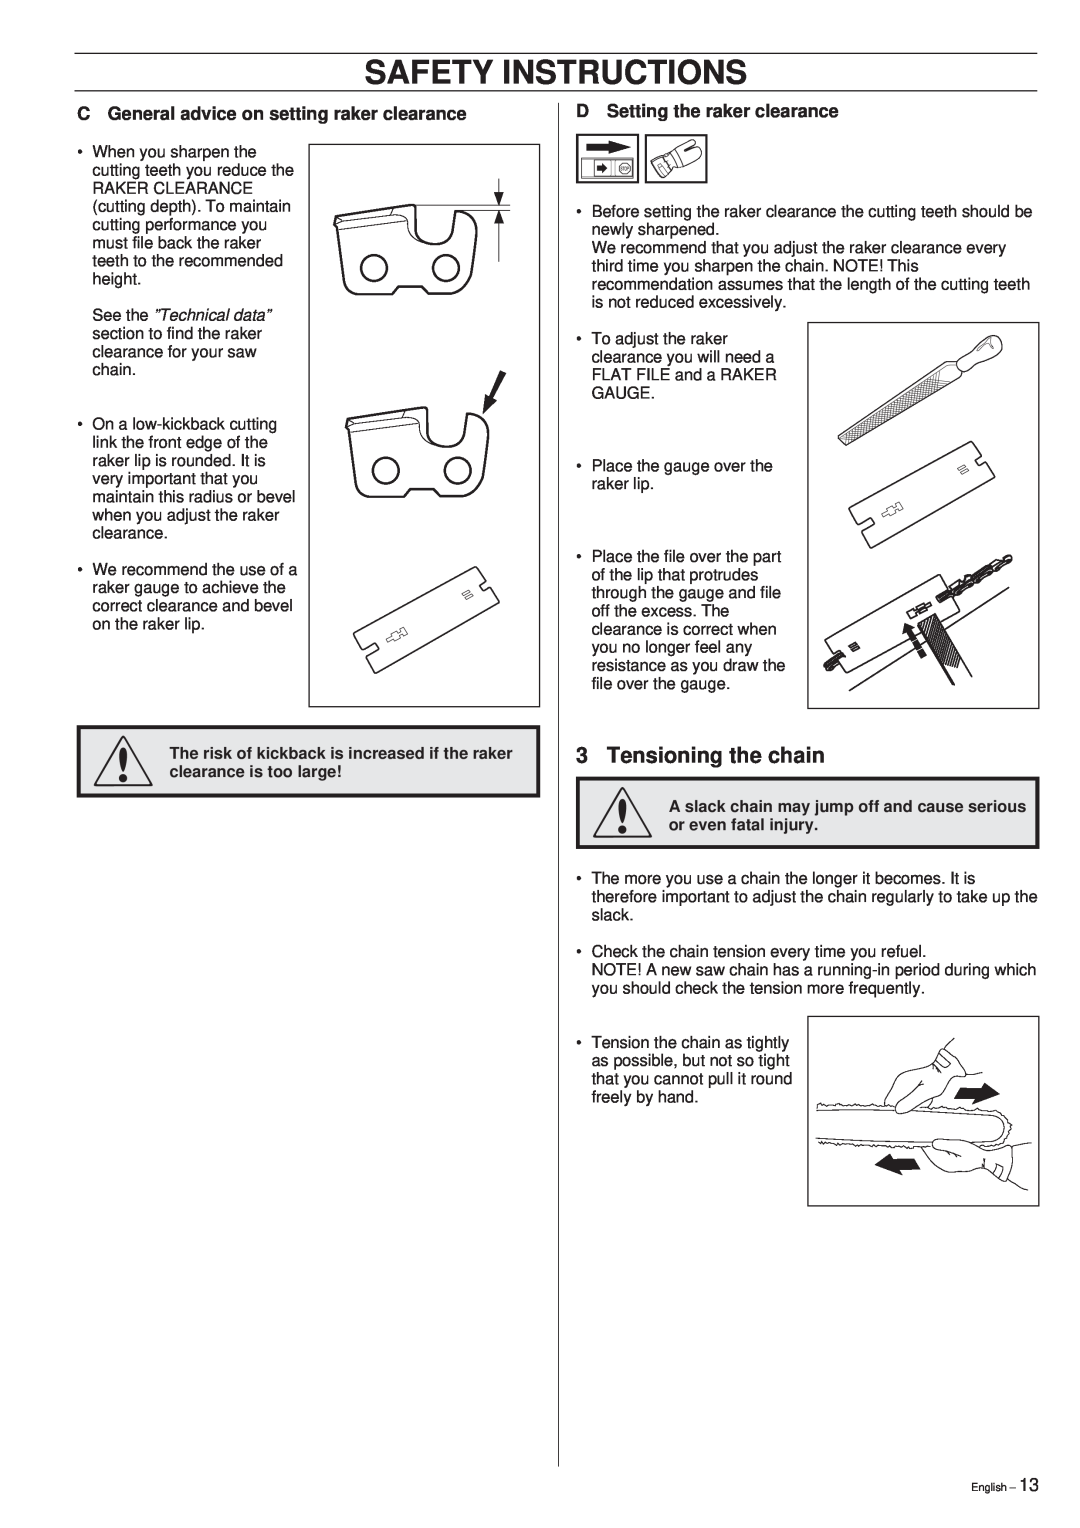 Husqvarna 288XP/XP lite manual Safety Instructions, Tensioning the chain, C General advice on setting raker clearance 